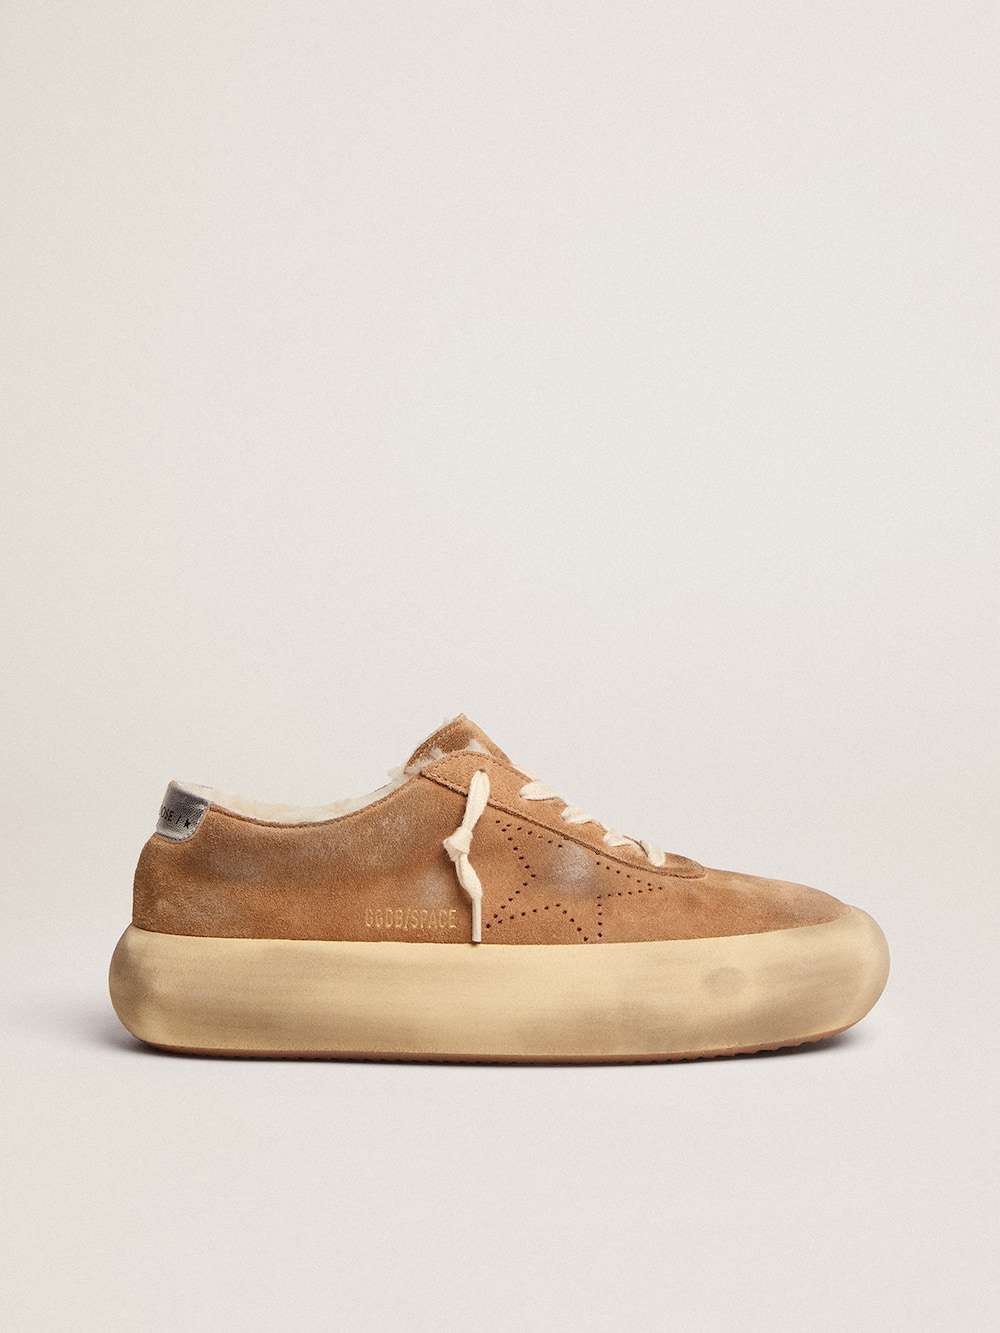 Golden Goose - Women's Space-Star shoes in tobacco-colored suede with shearling lining in 